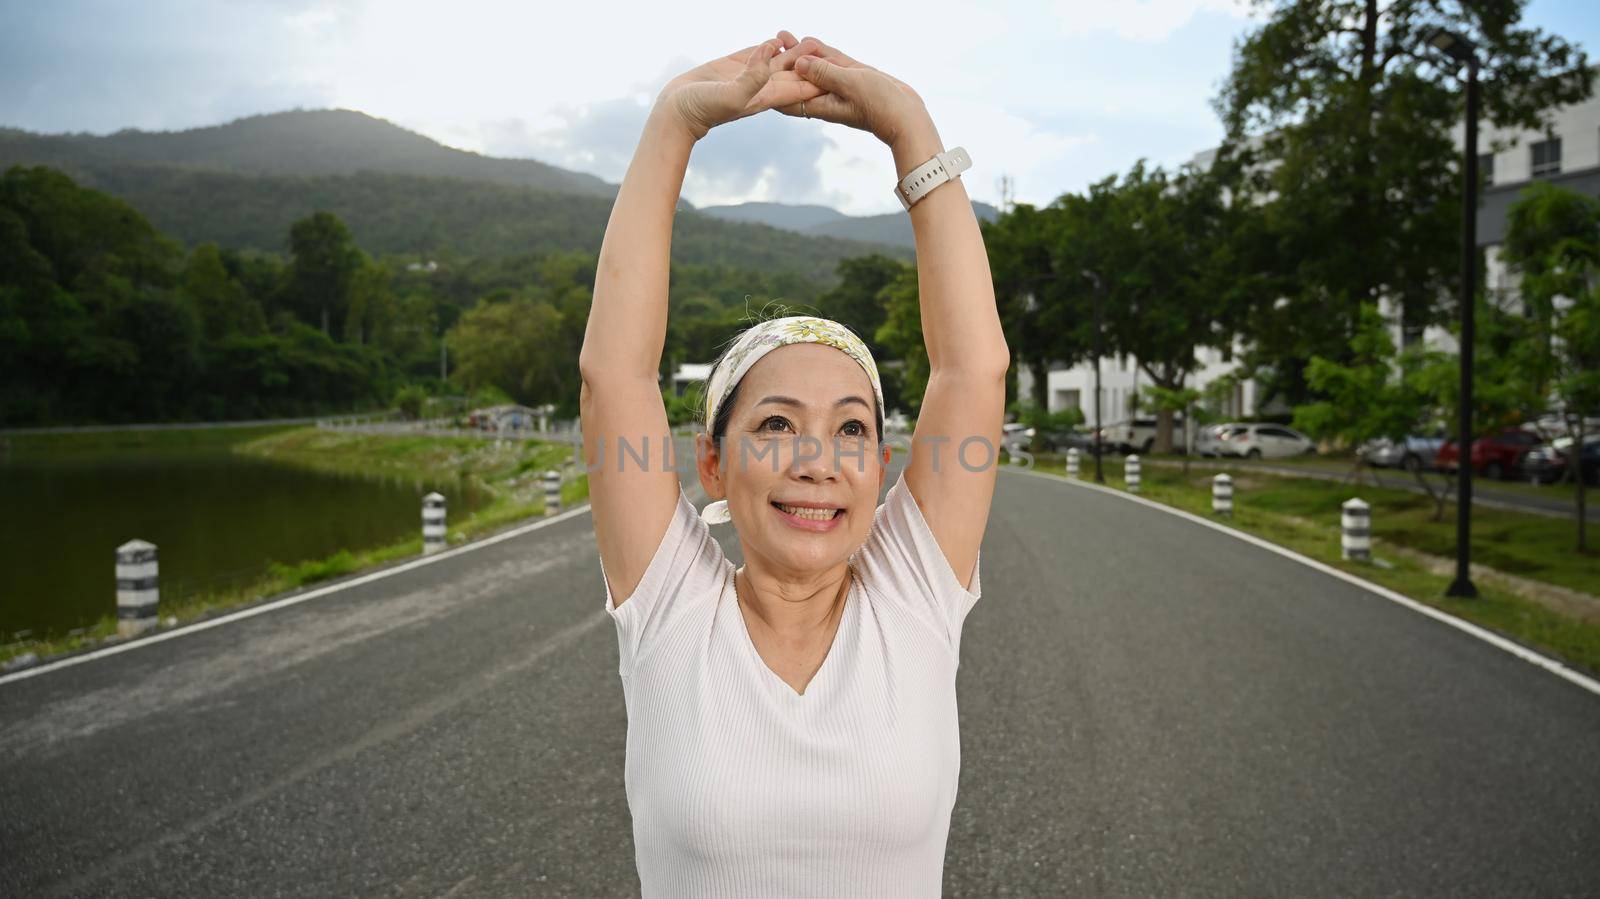 Smiling middle aged woman stretching muscle before workout session at the park in early morning. Healthy lifestyle, fitness and sport concept concept.